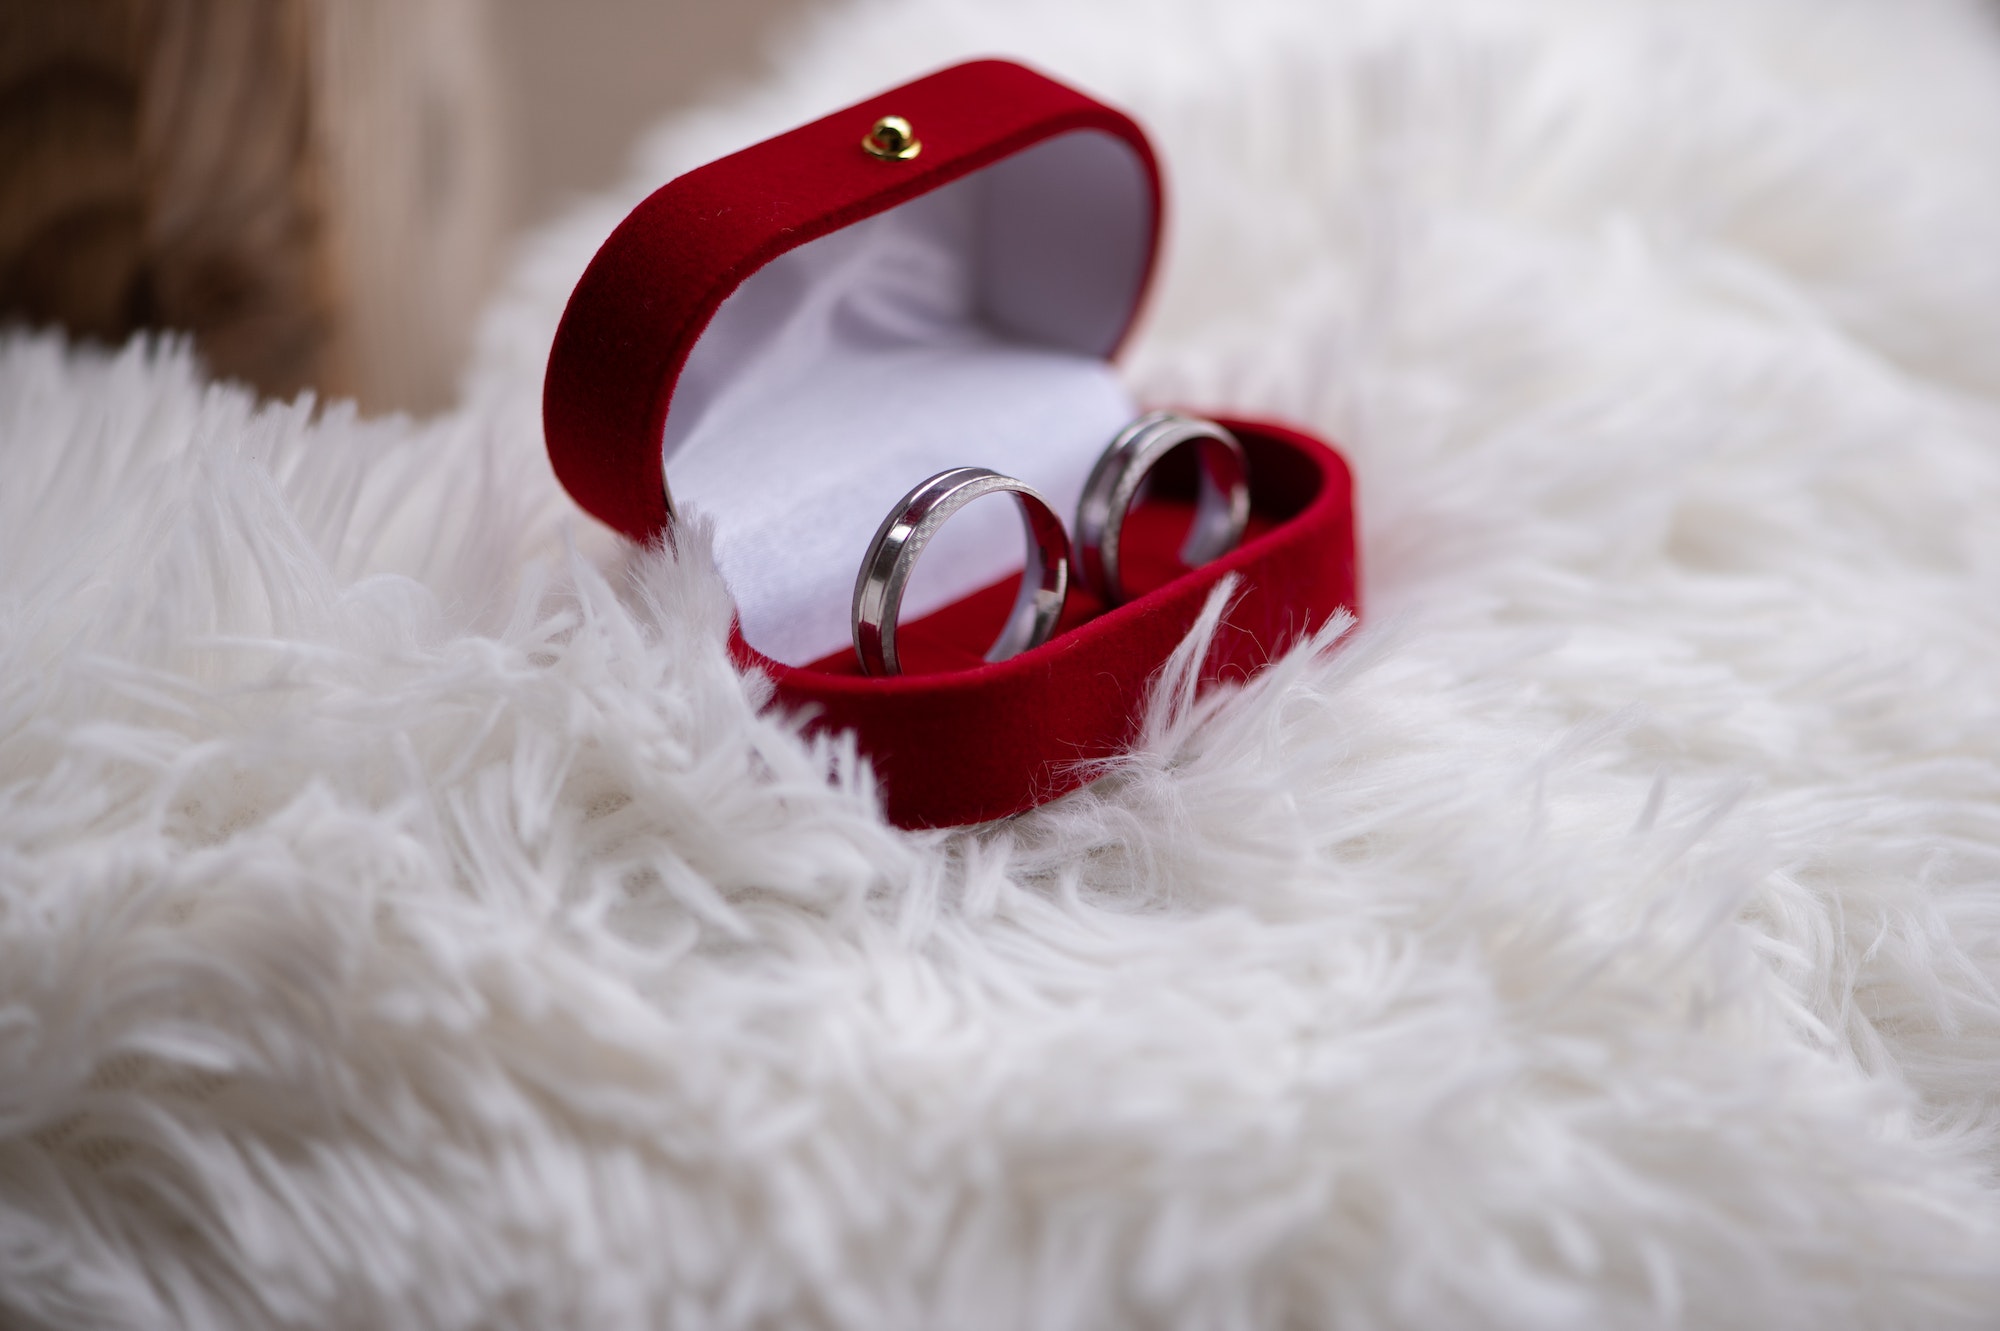 Wedding silver rings in a red box on a white pillow background